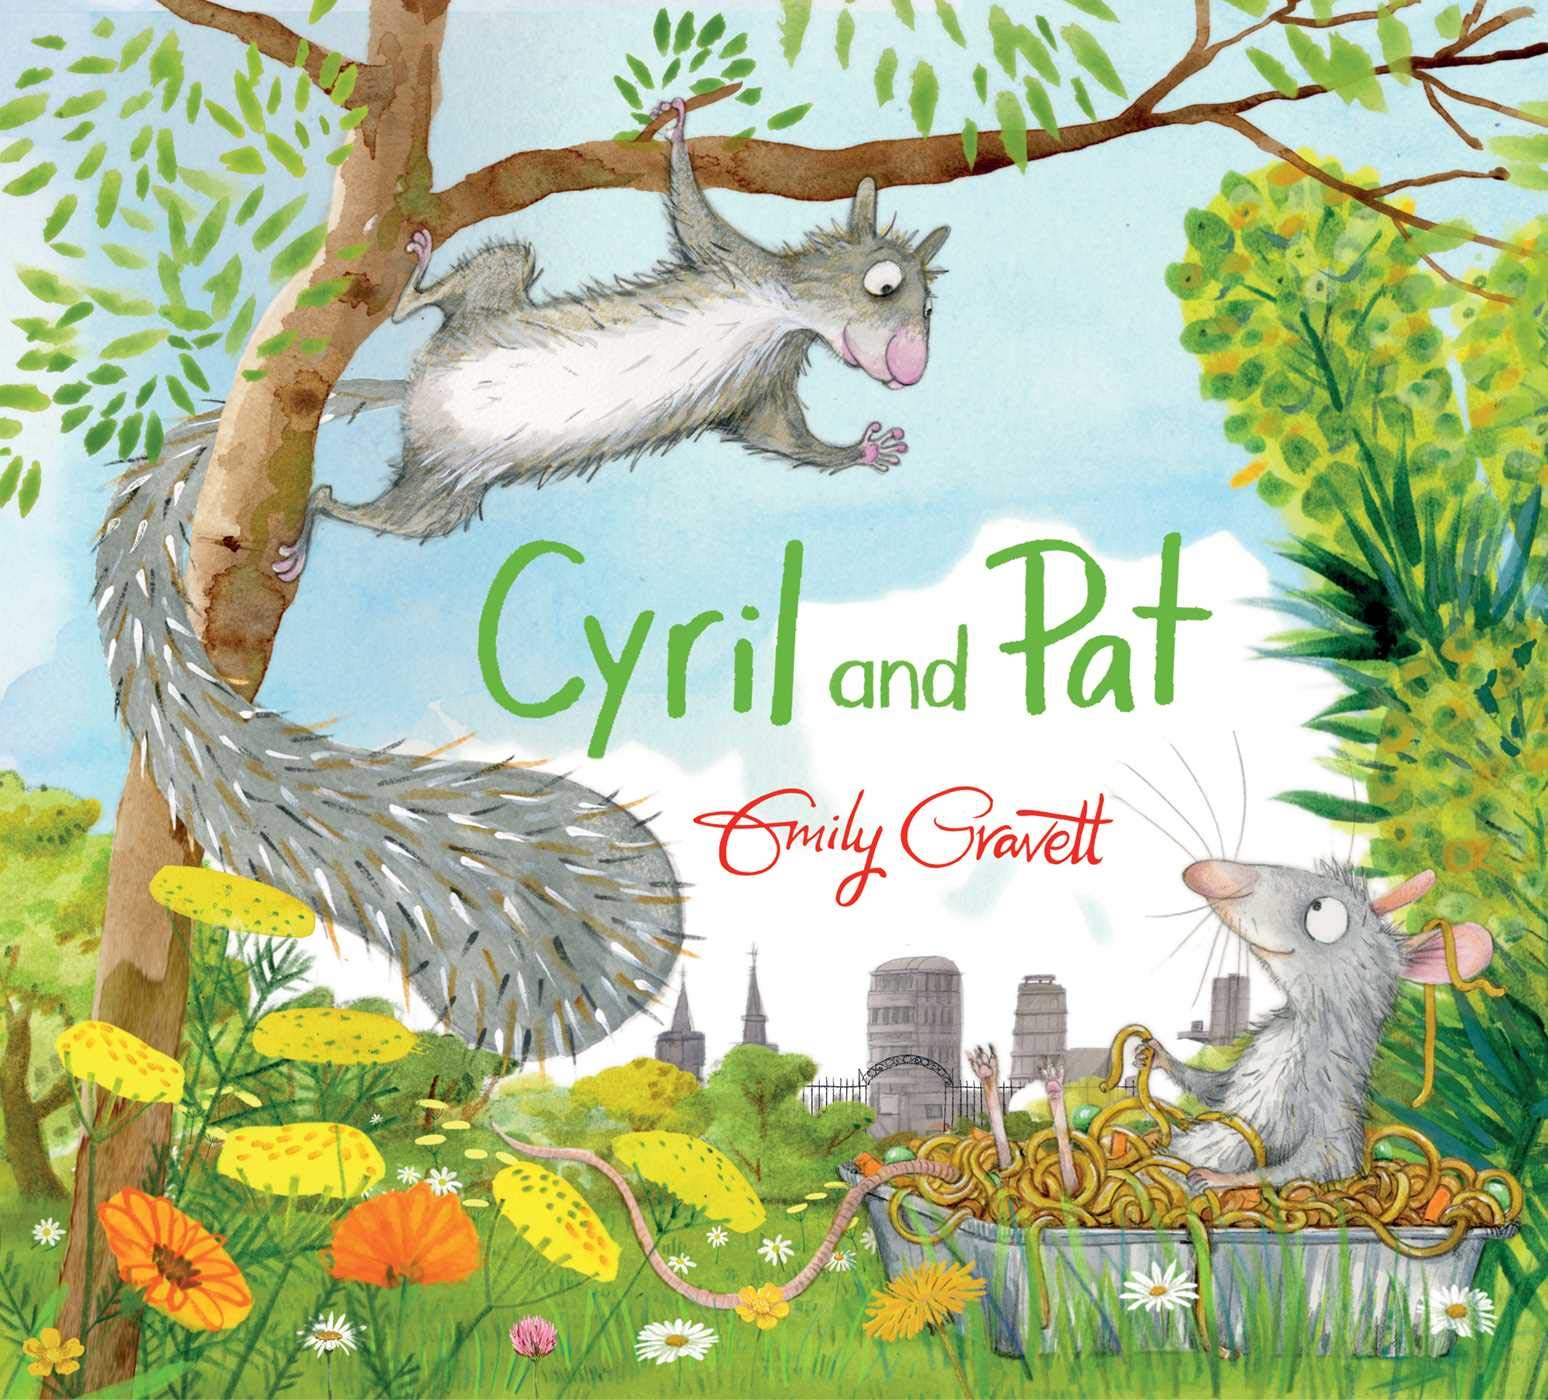 Cyril and Pat by Emily Gravett